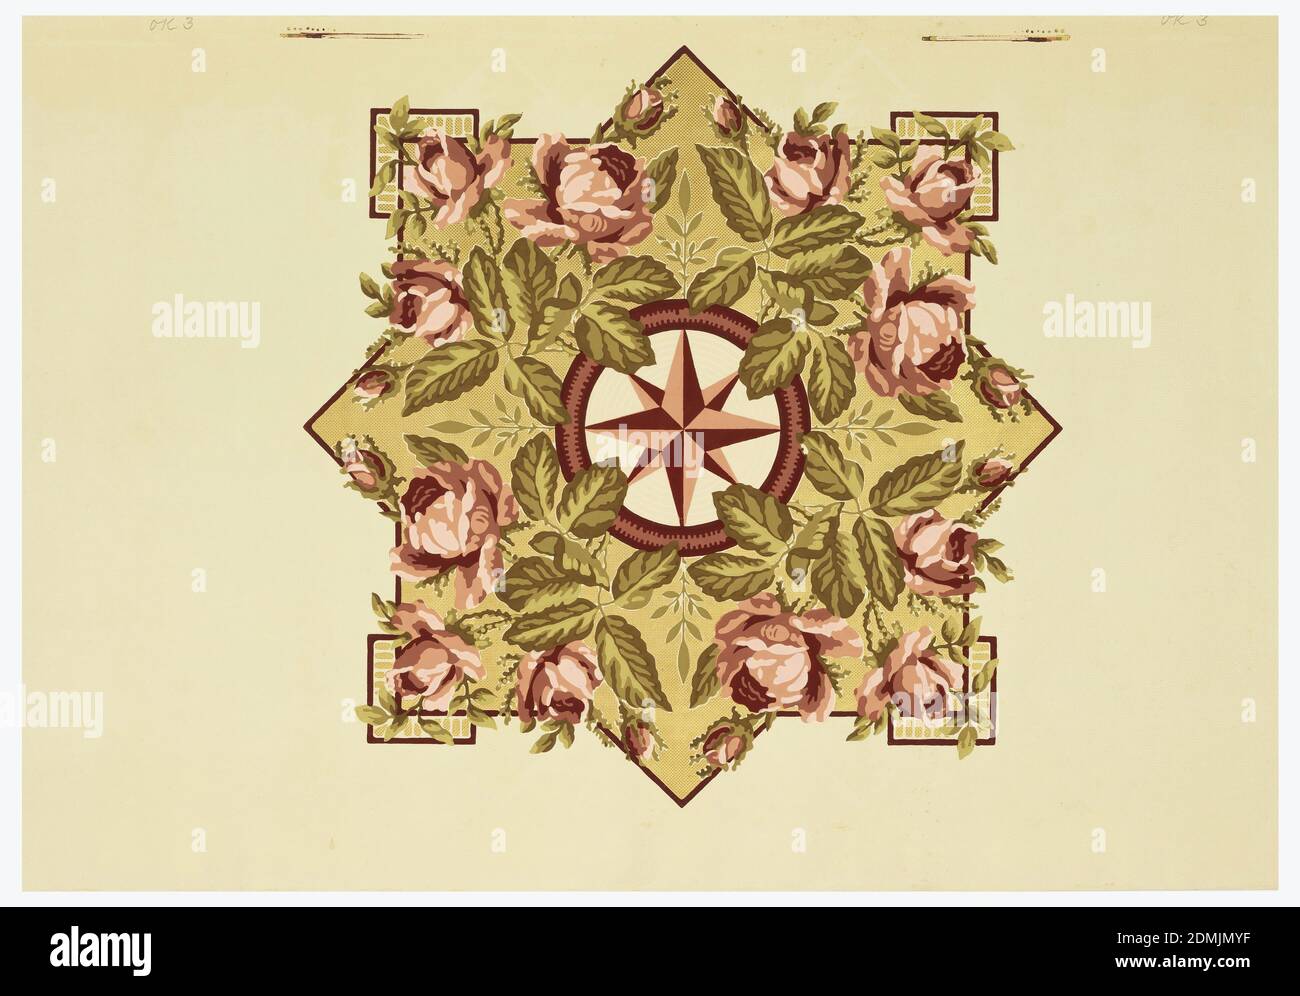 Ceiling medallion, Block-printed on paper, Ceiling medallion: central eight-pointed star surrounded by large red roses and foliage, set within a square framework. Printed on tan ground., USA, 1875–1906, Wallcoverings, Ceiling medallion Stock Photo